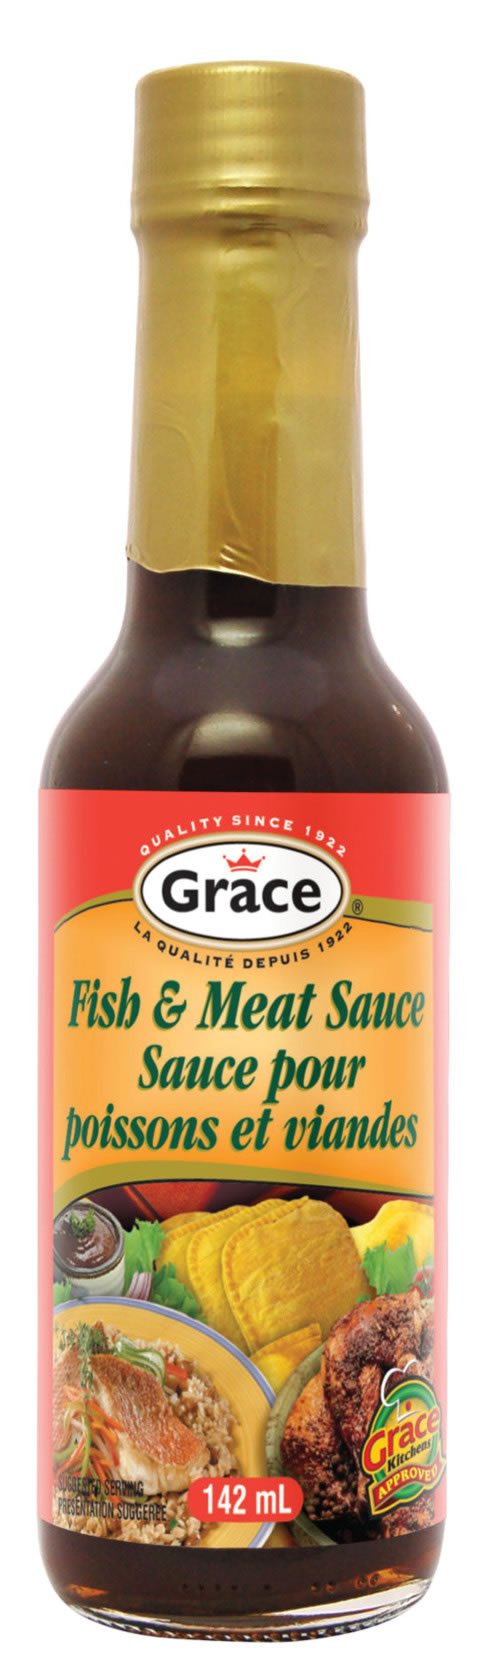 Grace Fish and Meat Sauce